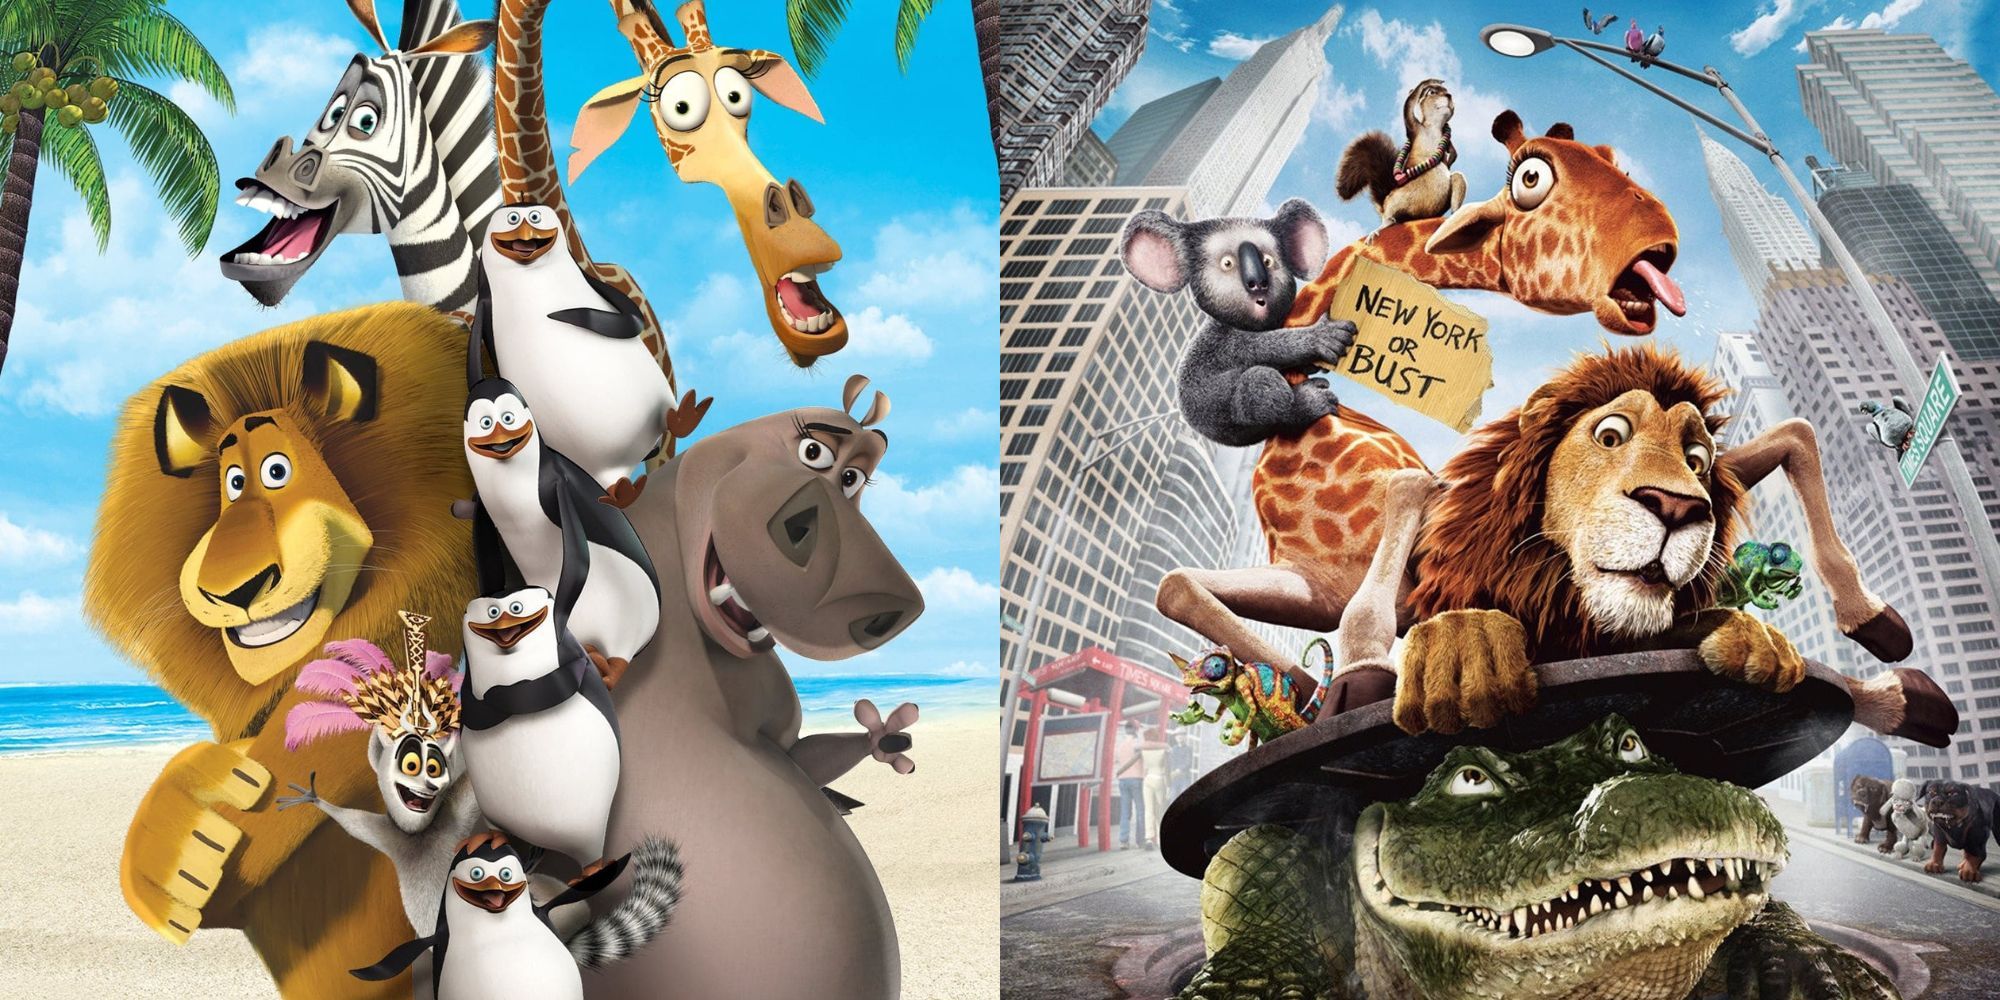 Posters for Madagascar and the Wild